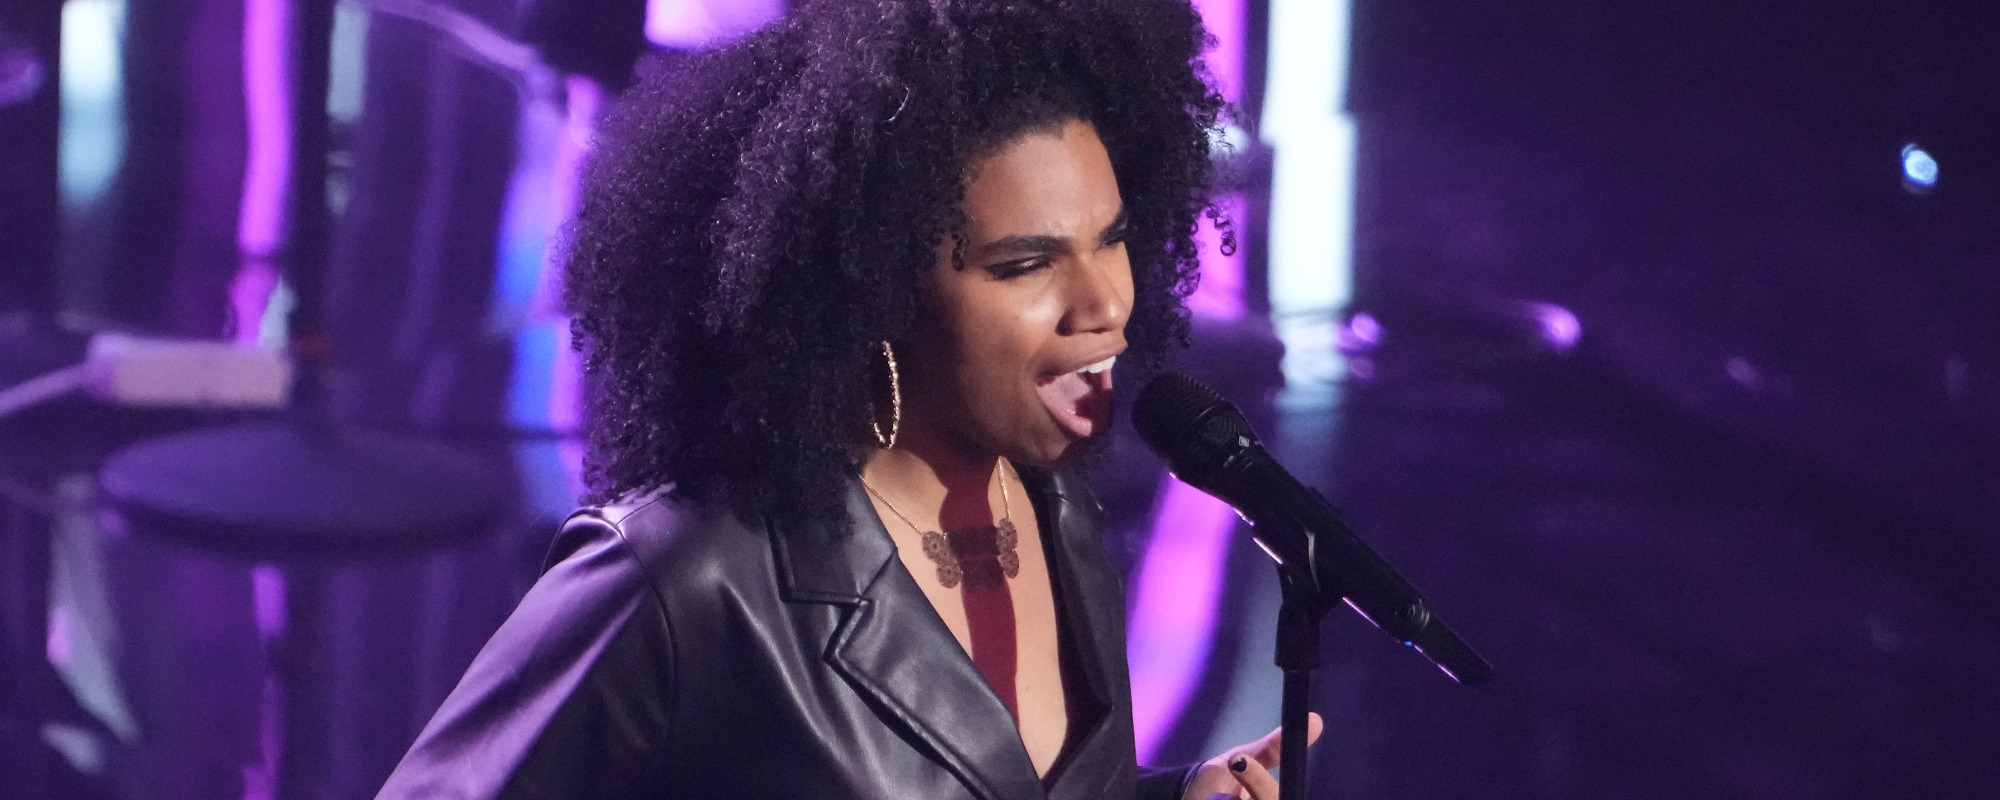 Wé Ani’s Performance of “Ain’t No Way” by Aretha Franklin Secures Her Spot in Top 24 on ‘American Idol’